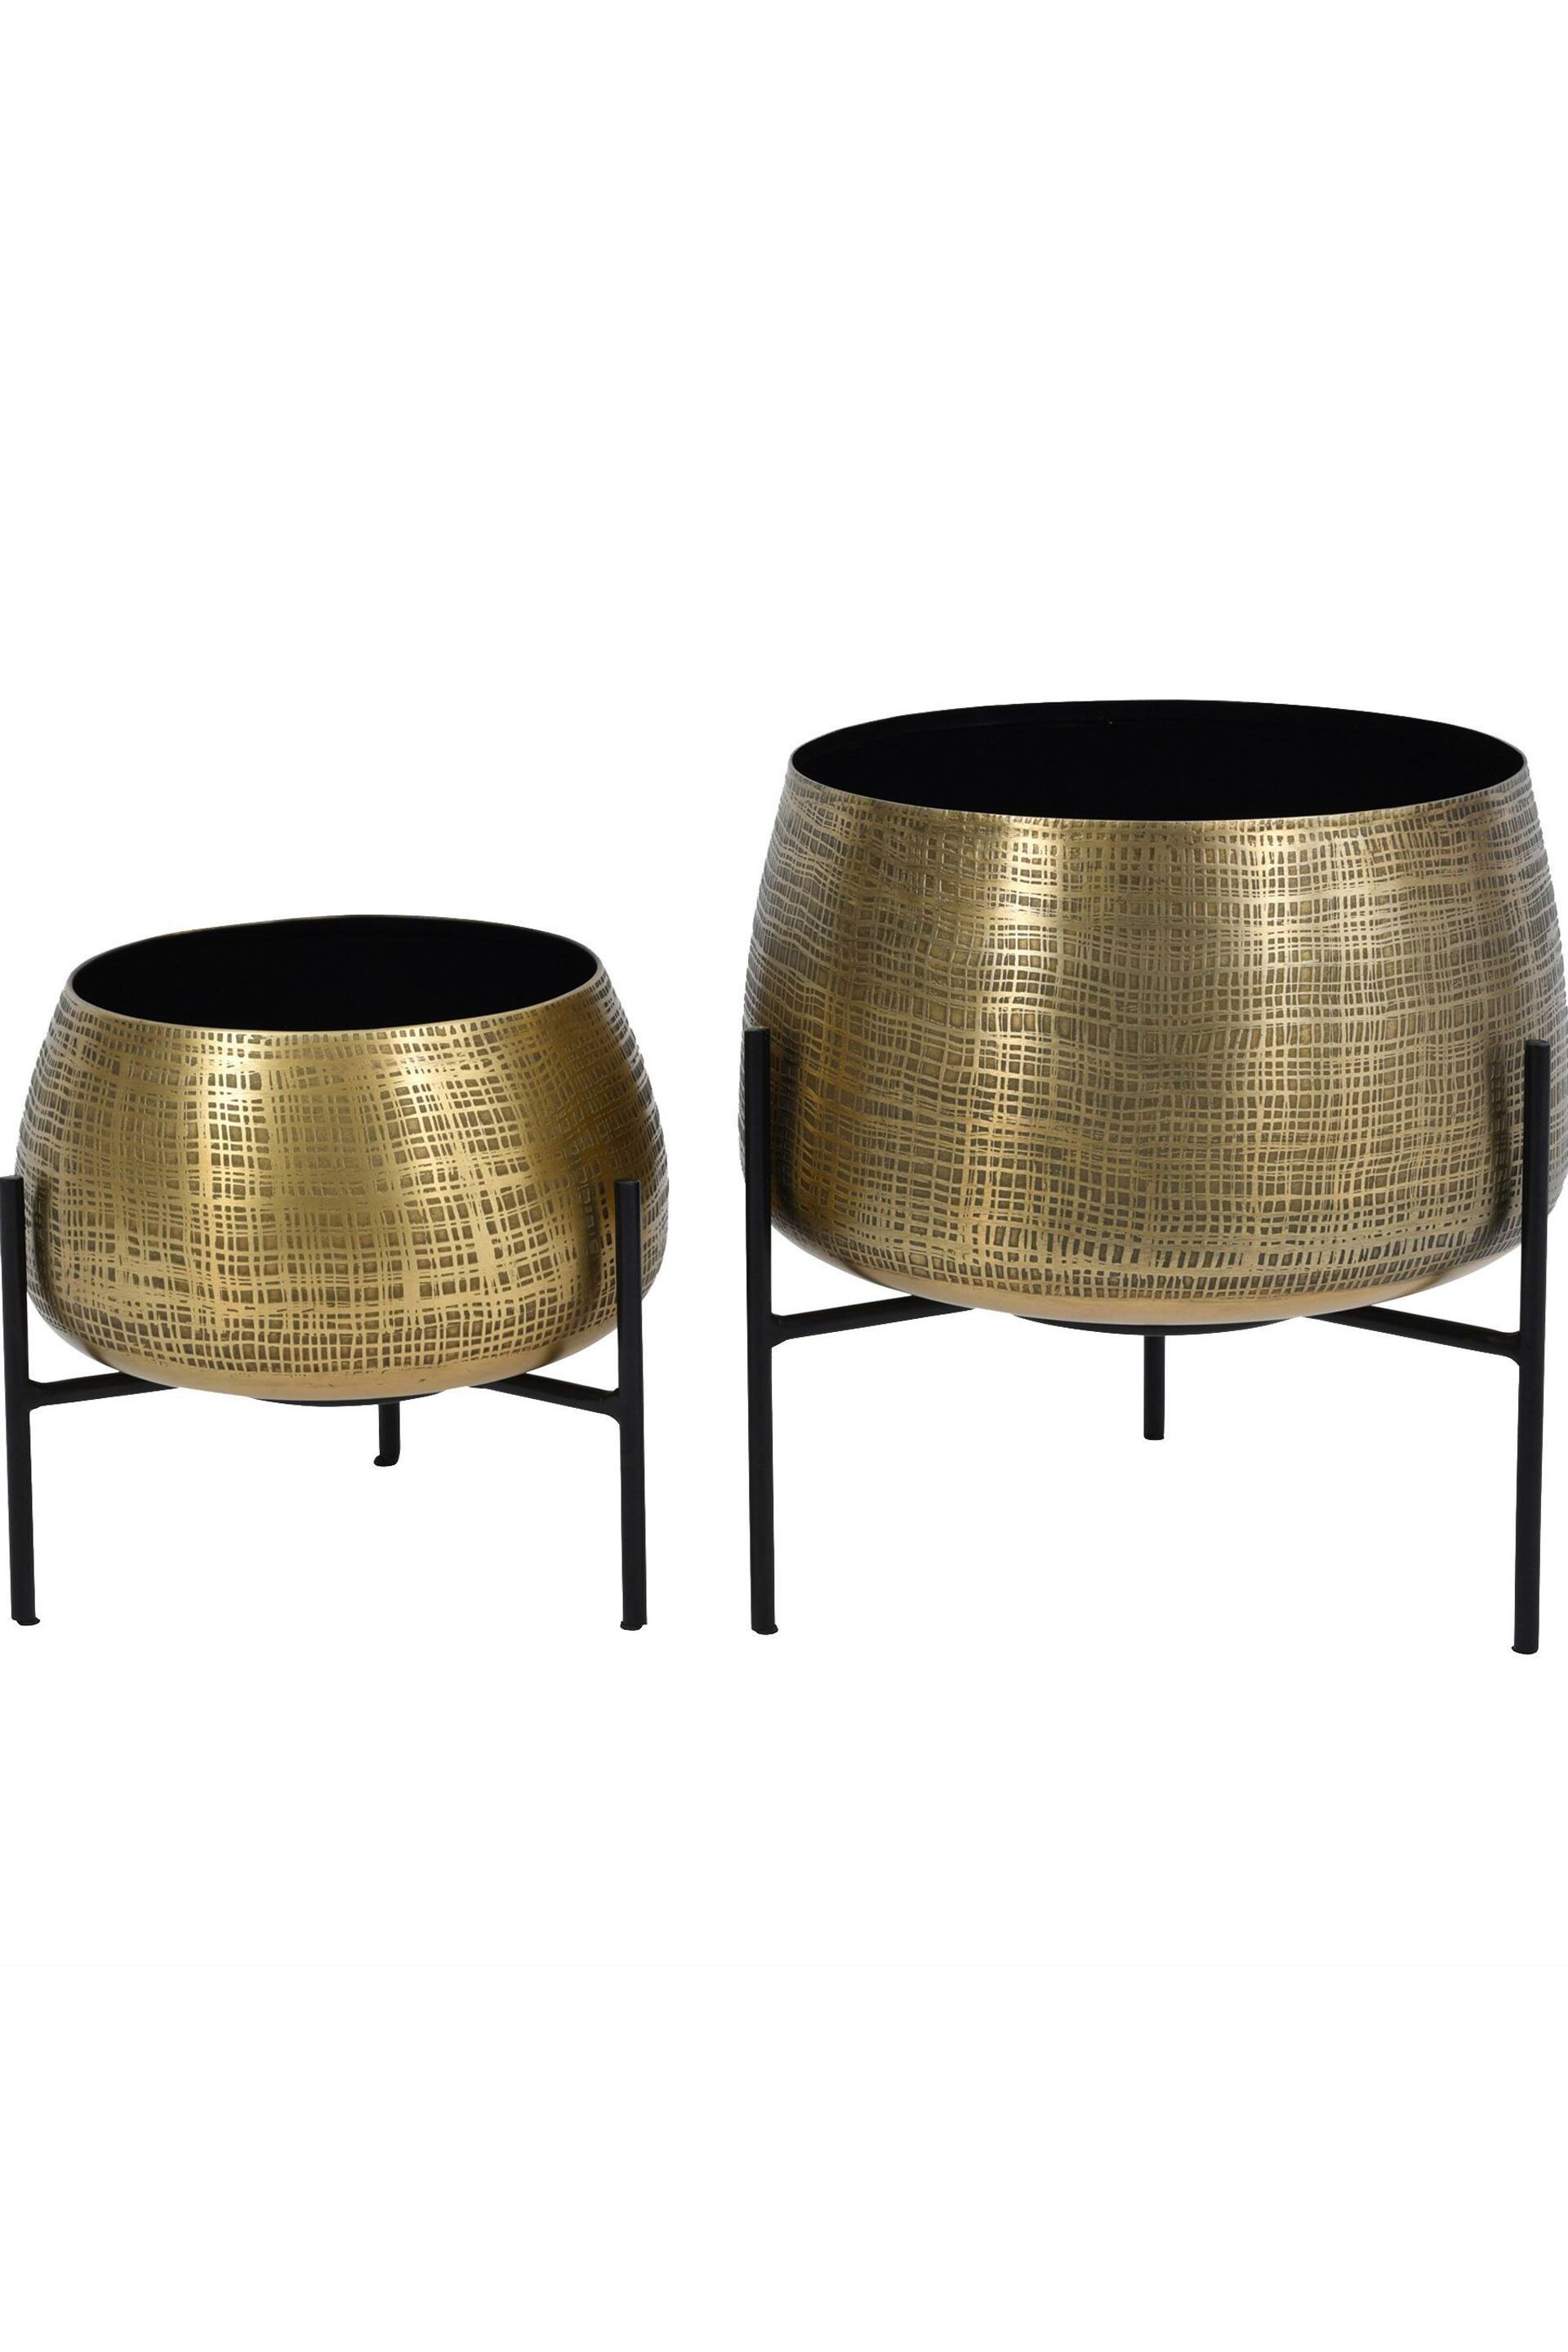 Libra Brass Clyde Tabletop Brass Set of 2 Planters on Black Stands - Image 2 of 4